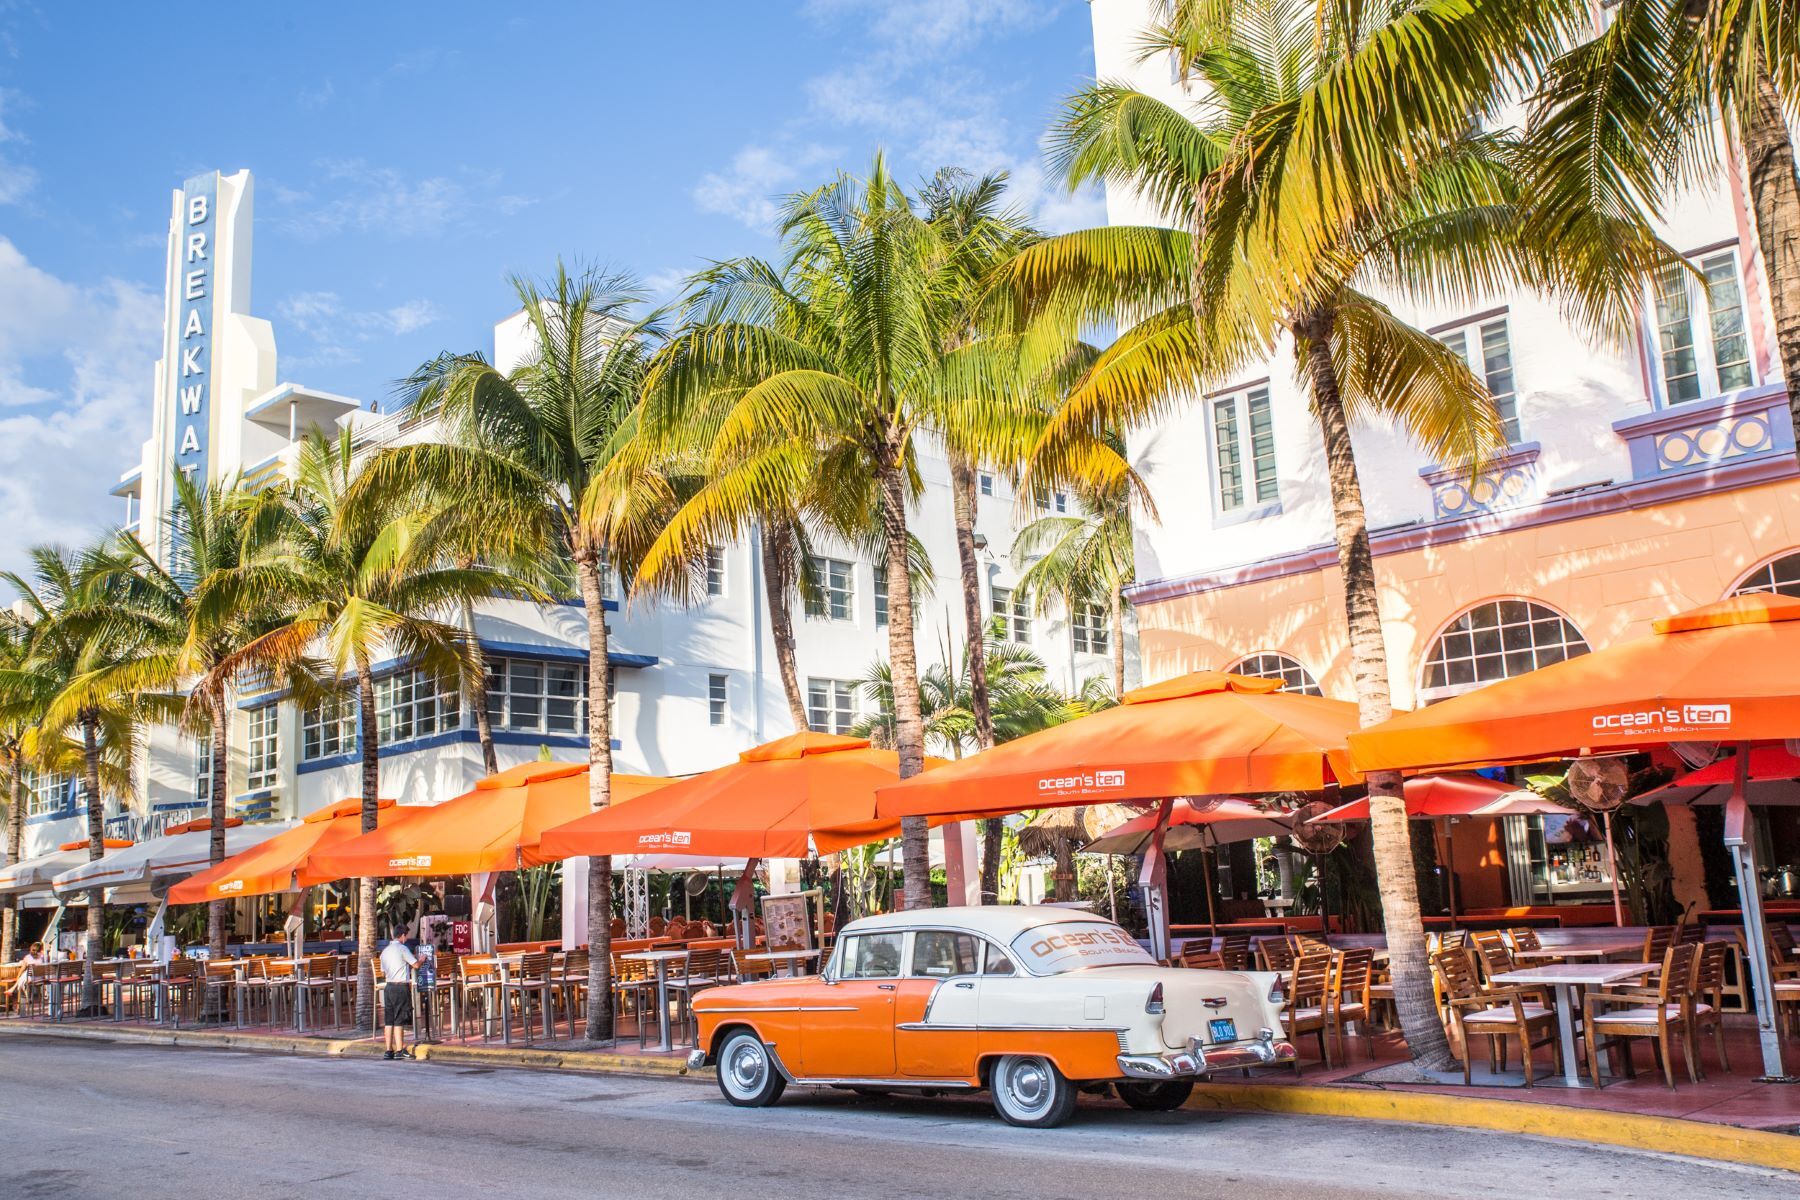 <p class="p1"><span>Miami beaches are, of course, unbeatable, but there’s much more than sand to enjoy in this town. Visit its <a href="https://www.mdpl.org/welcome-center/" rel="noreferrer noopener"><span>art deco district</span></a> or the <a href="http://vizcaya.org/" rel="noreferrer noopener"><span>Vizcaya Museum and Gardens</span></a> where this very American city shows off its traces of European artistry.</span></p>